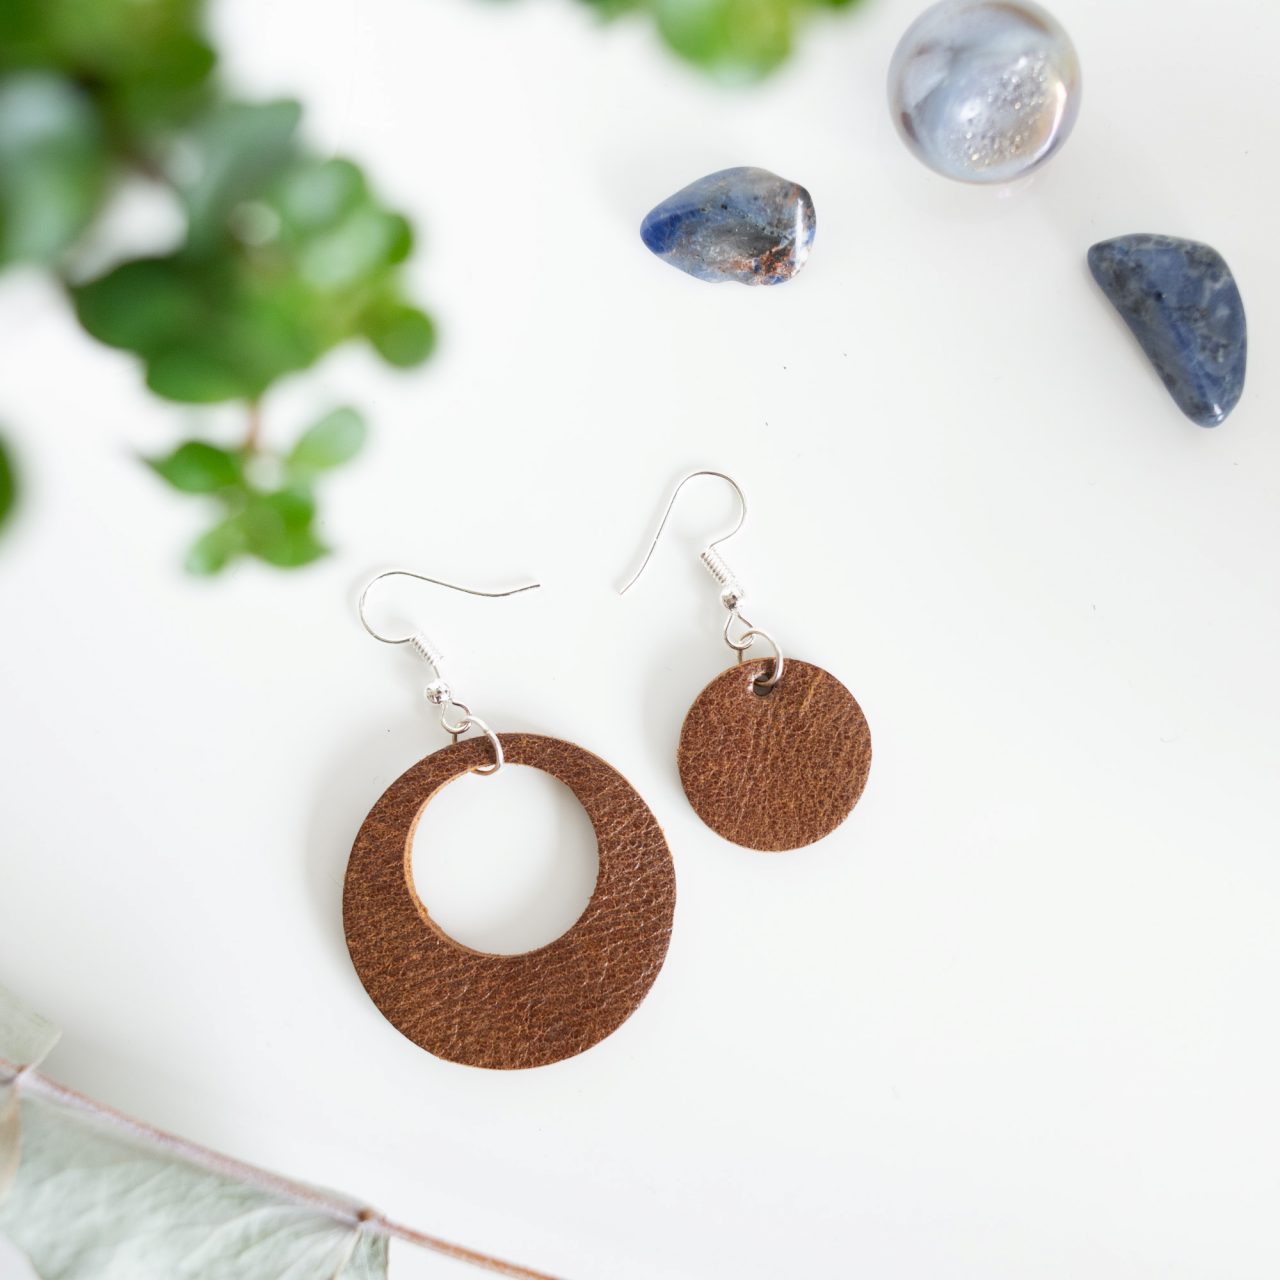 Brown asymmetric earrings made from reclaimed leather